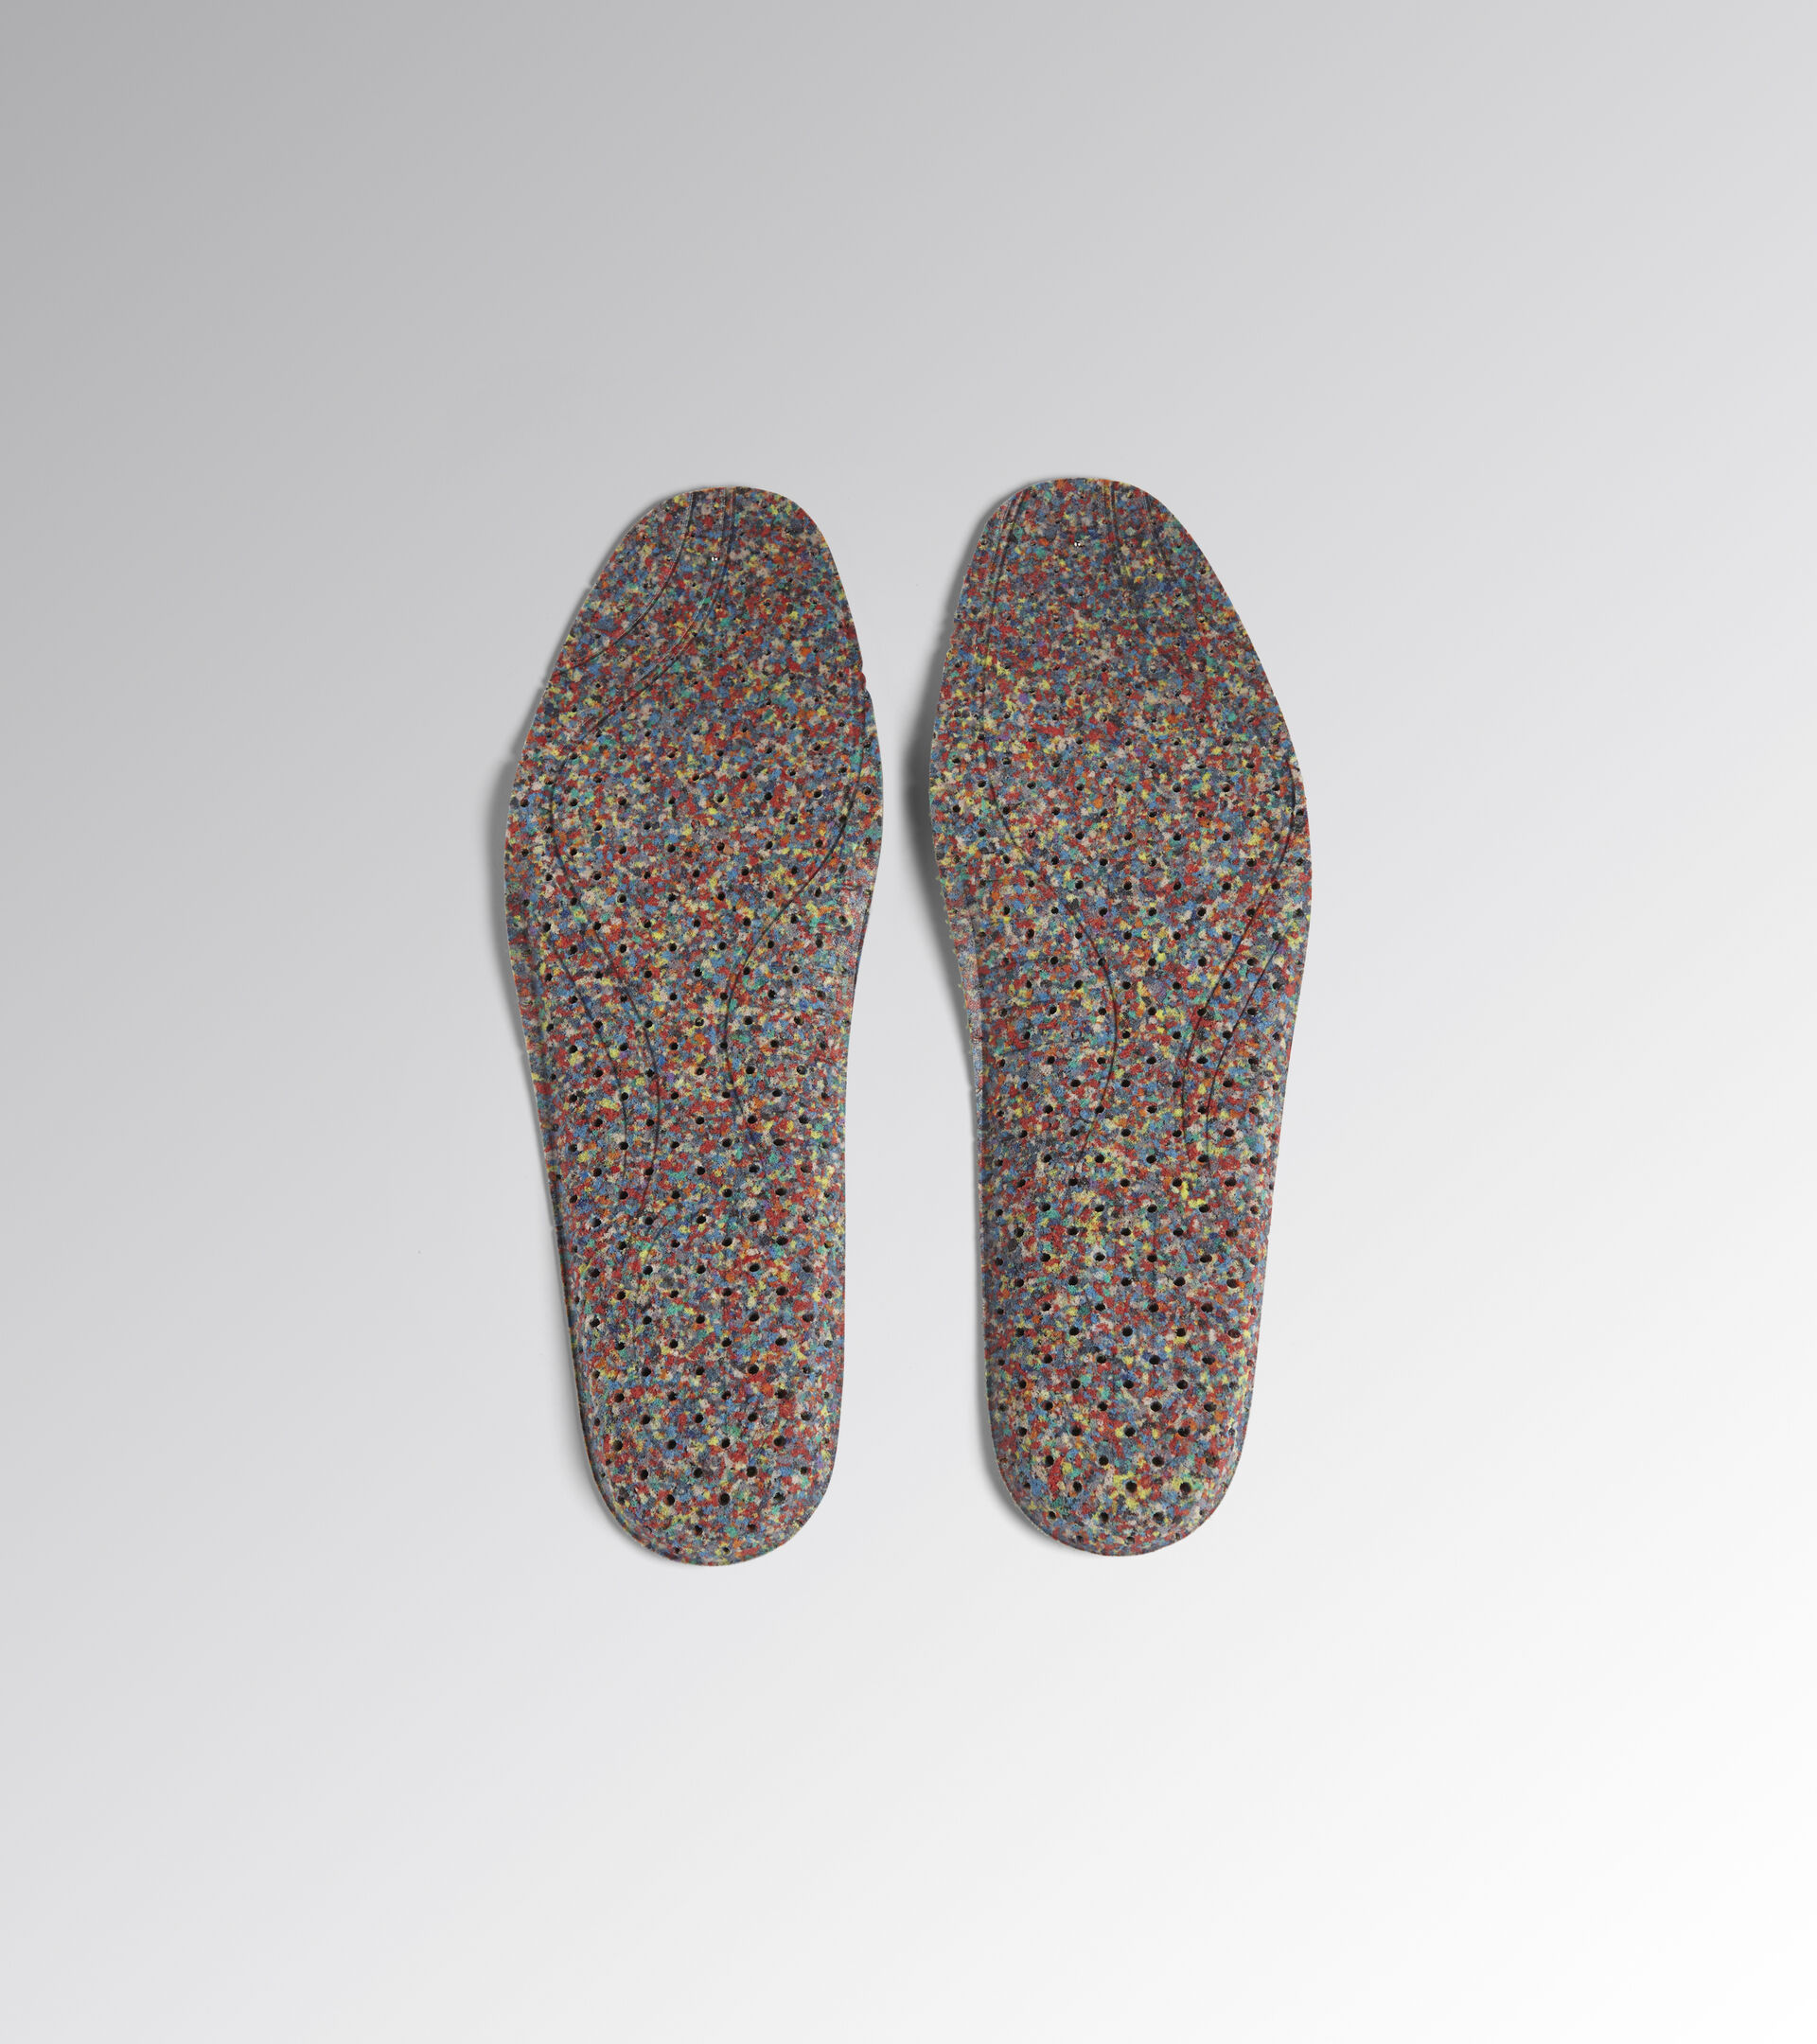 Insoles for Utility shoes INSOLE ECO ECO GREEN/BLACK - Utility